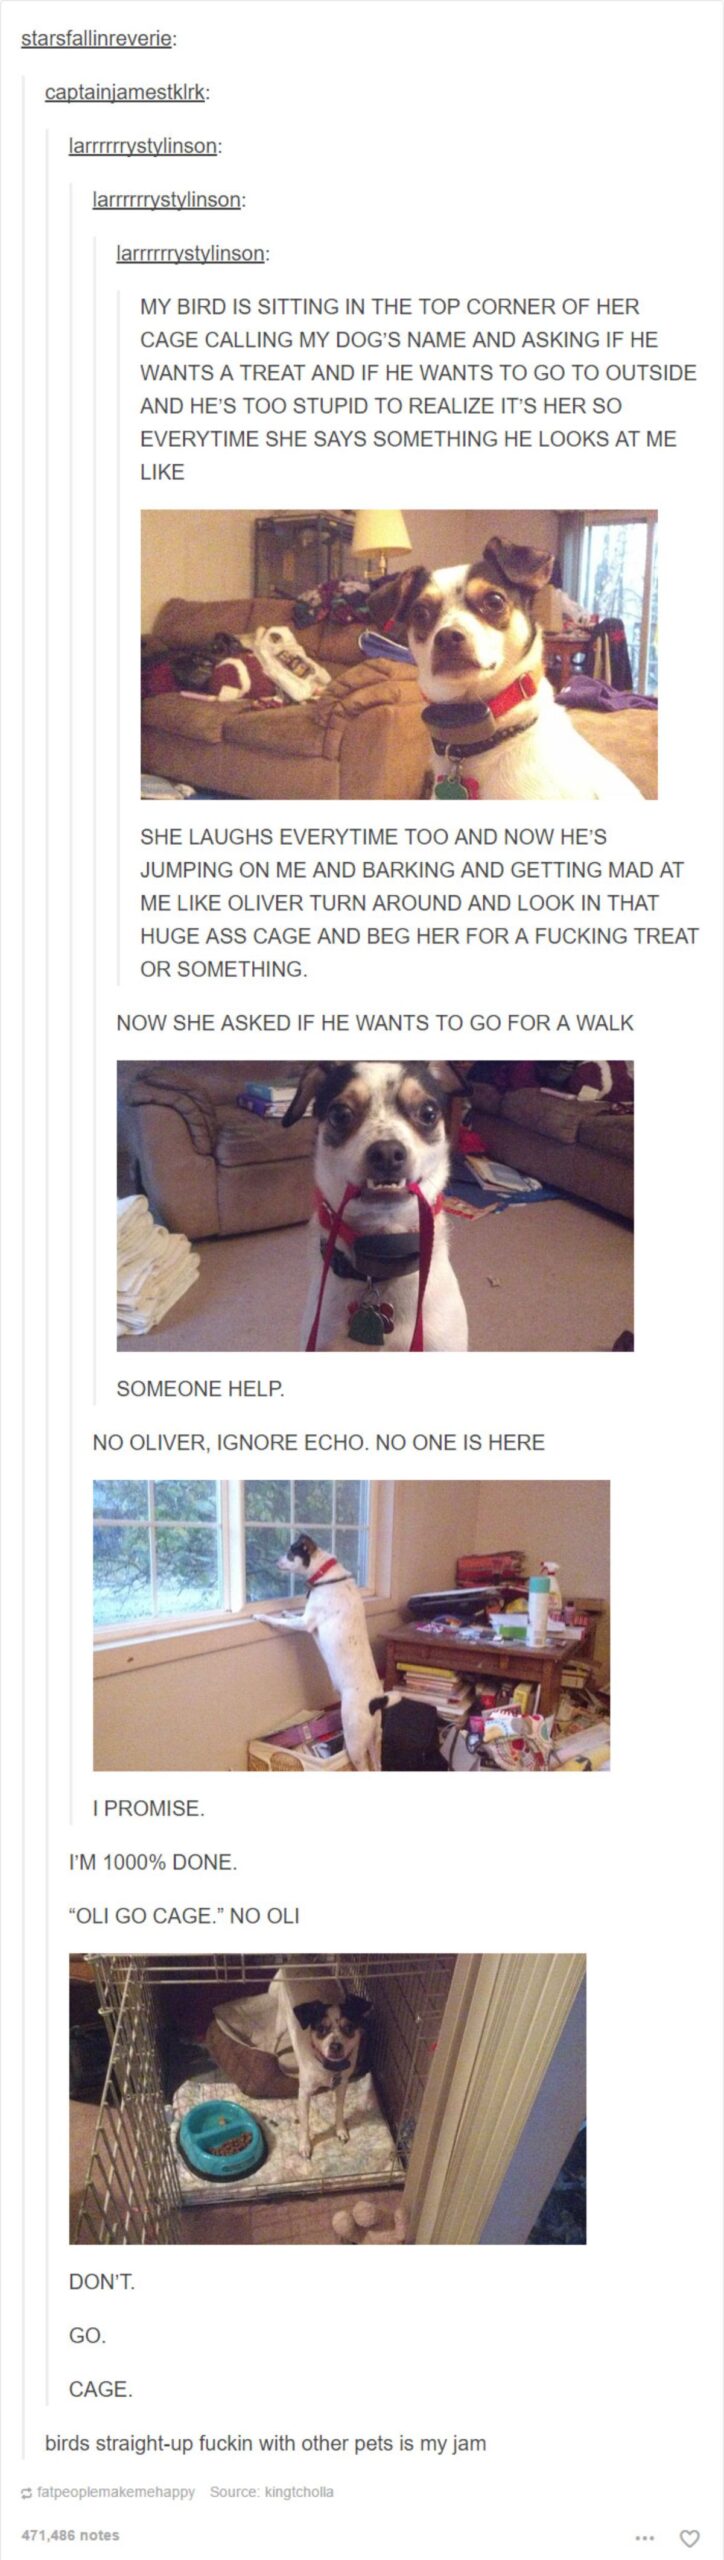 tumblr post of black and white dog getting tricked by the bird into expecting treats, going for a walk and going into the cage